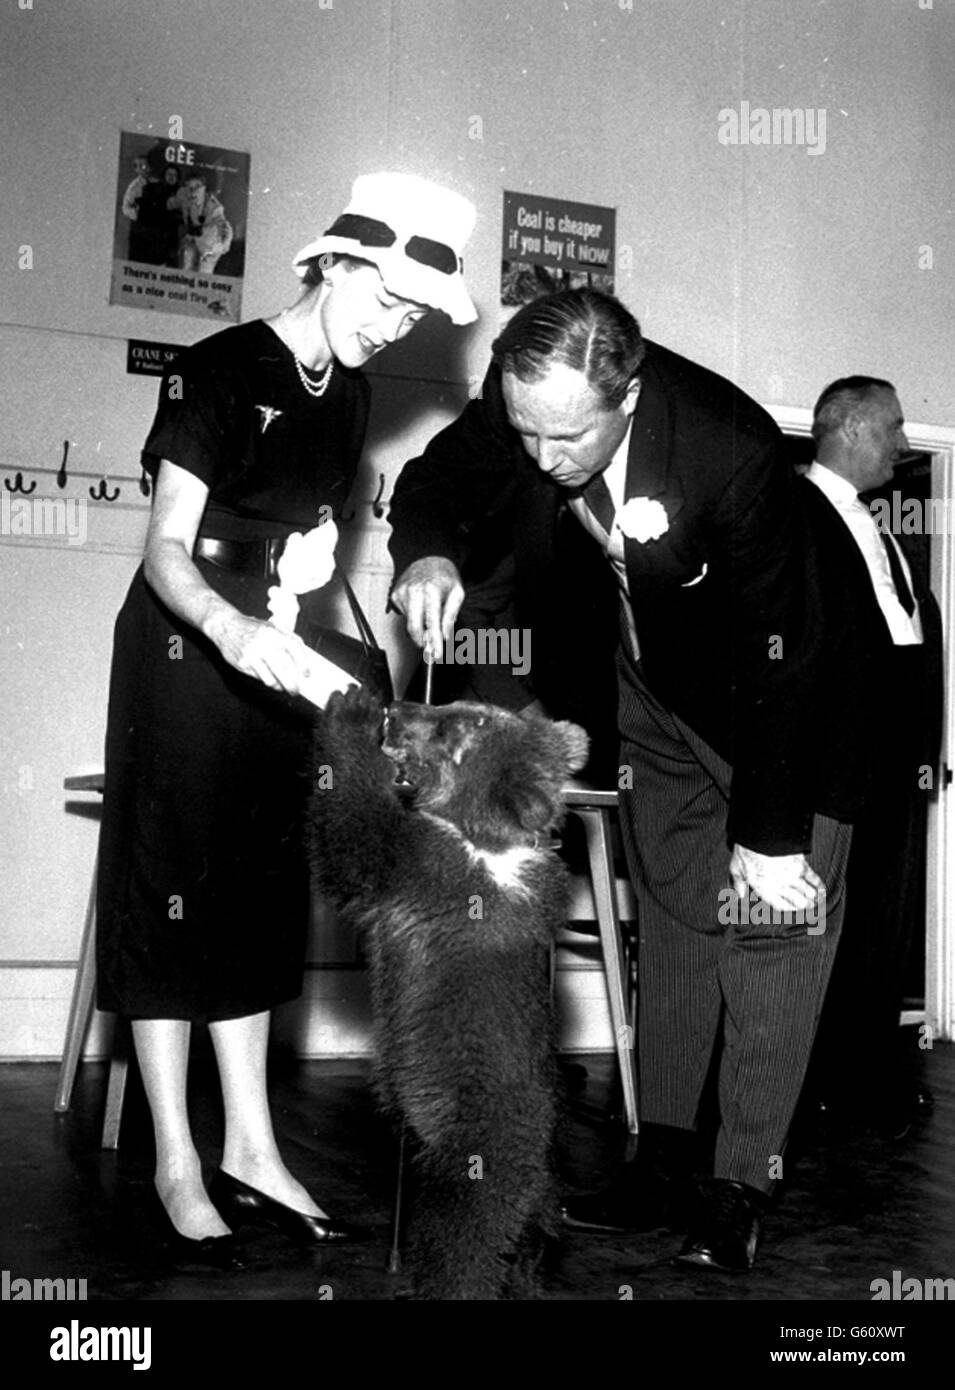 Minister of Power Mr Richard Wood and his wife refuel Cosy, the live bear mascot of the Coal Untilisation Council's Training Centre on their vists to inspect the training facilities. Stock Photo